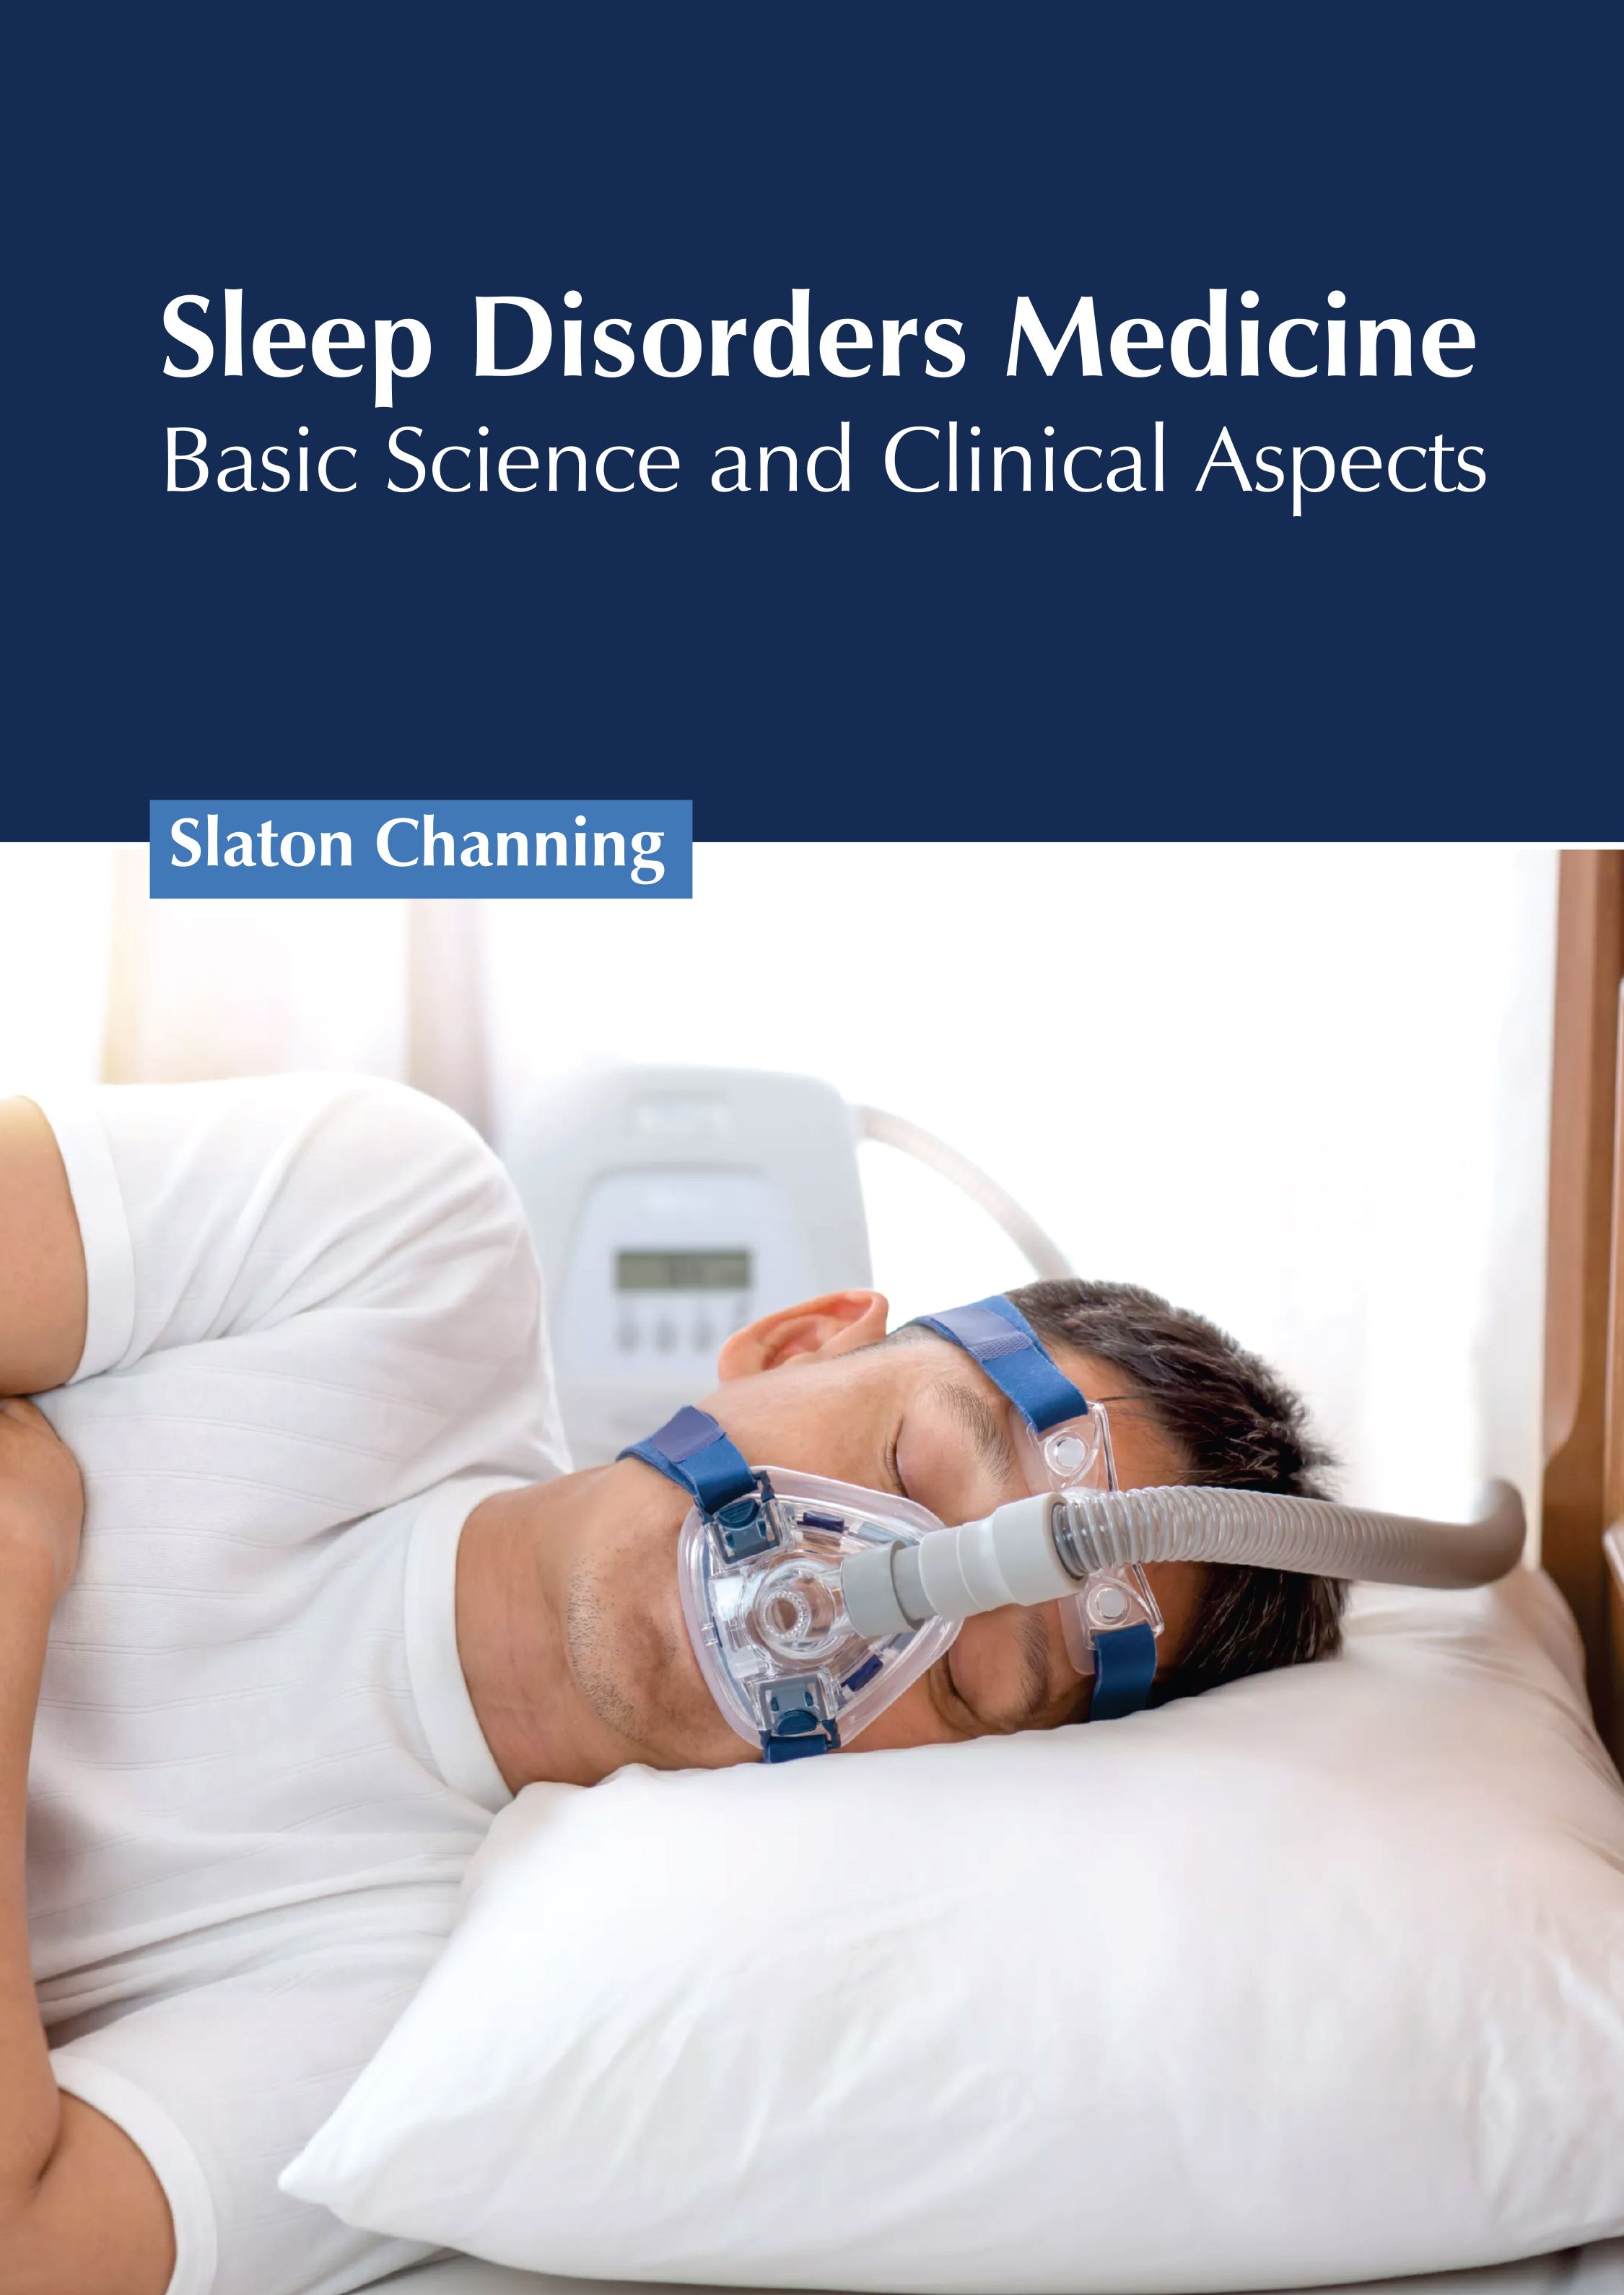 SLEEP DISORDERS MEDICINE: BASIC SCIENCE AND CLINICAL ASPECTS